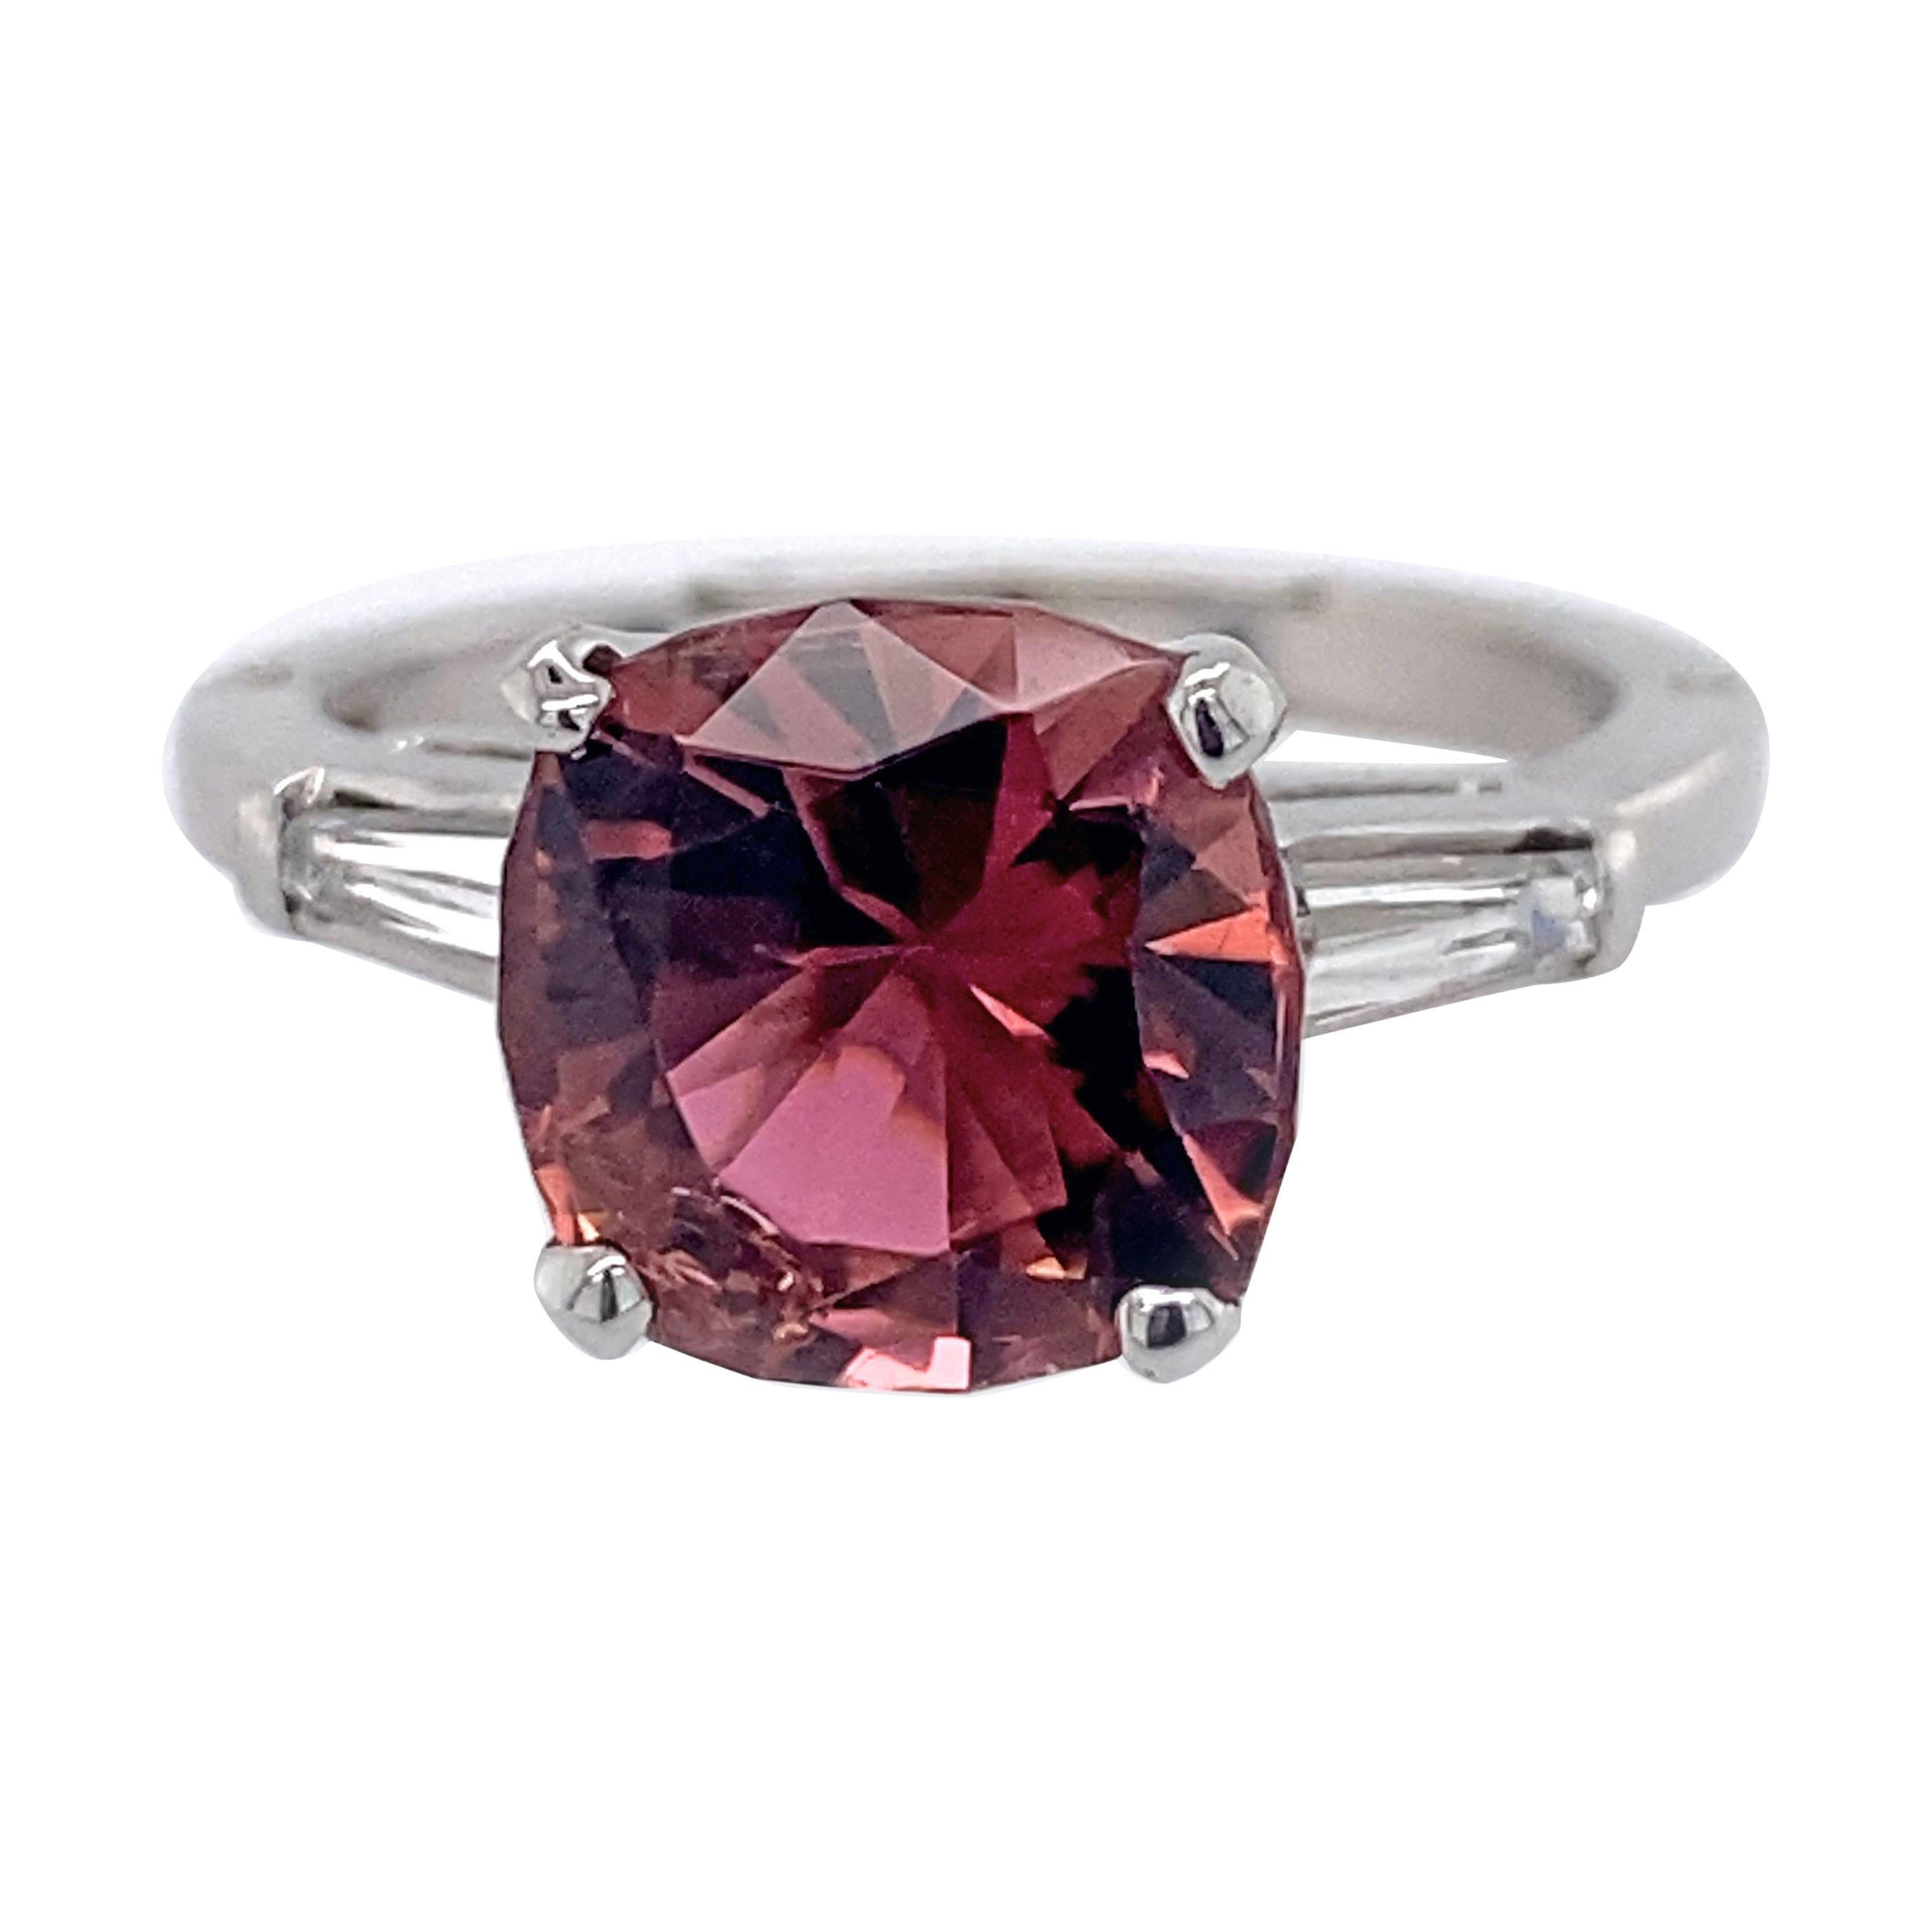 2.9 Carat Pink Tourmaline Engagement Ring with Baguettes in Platinum & Gold For Sale